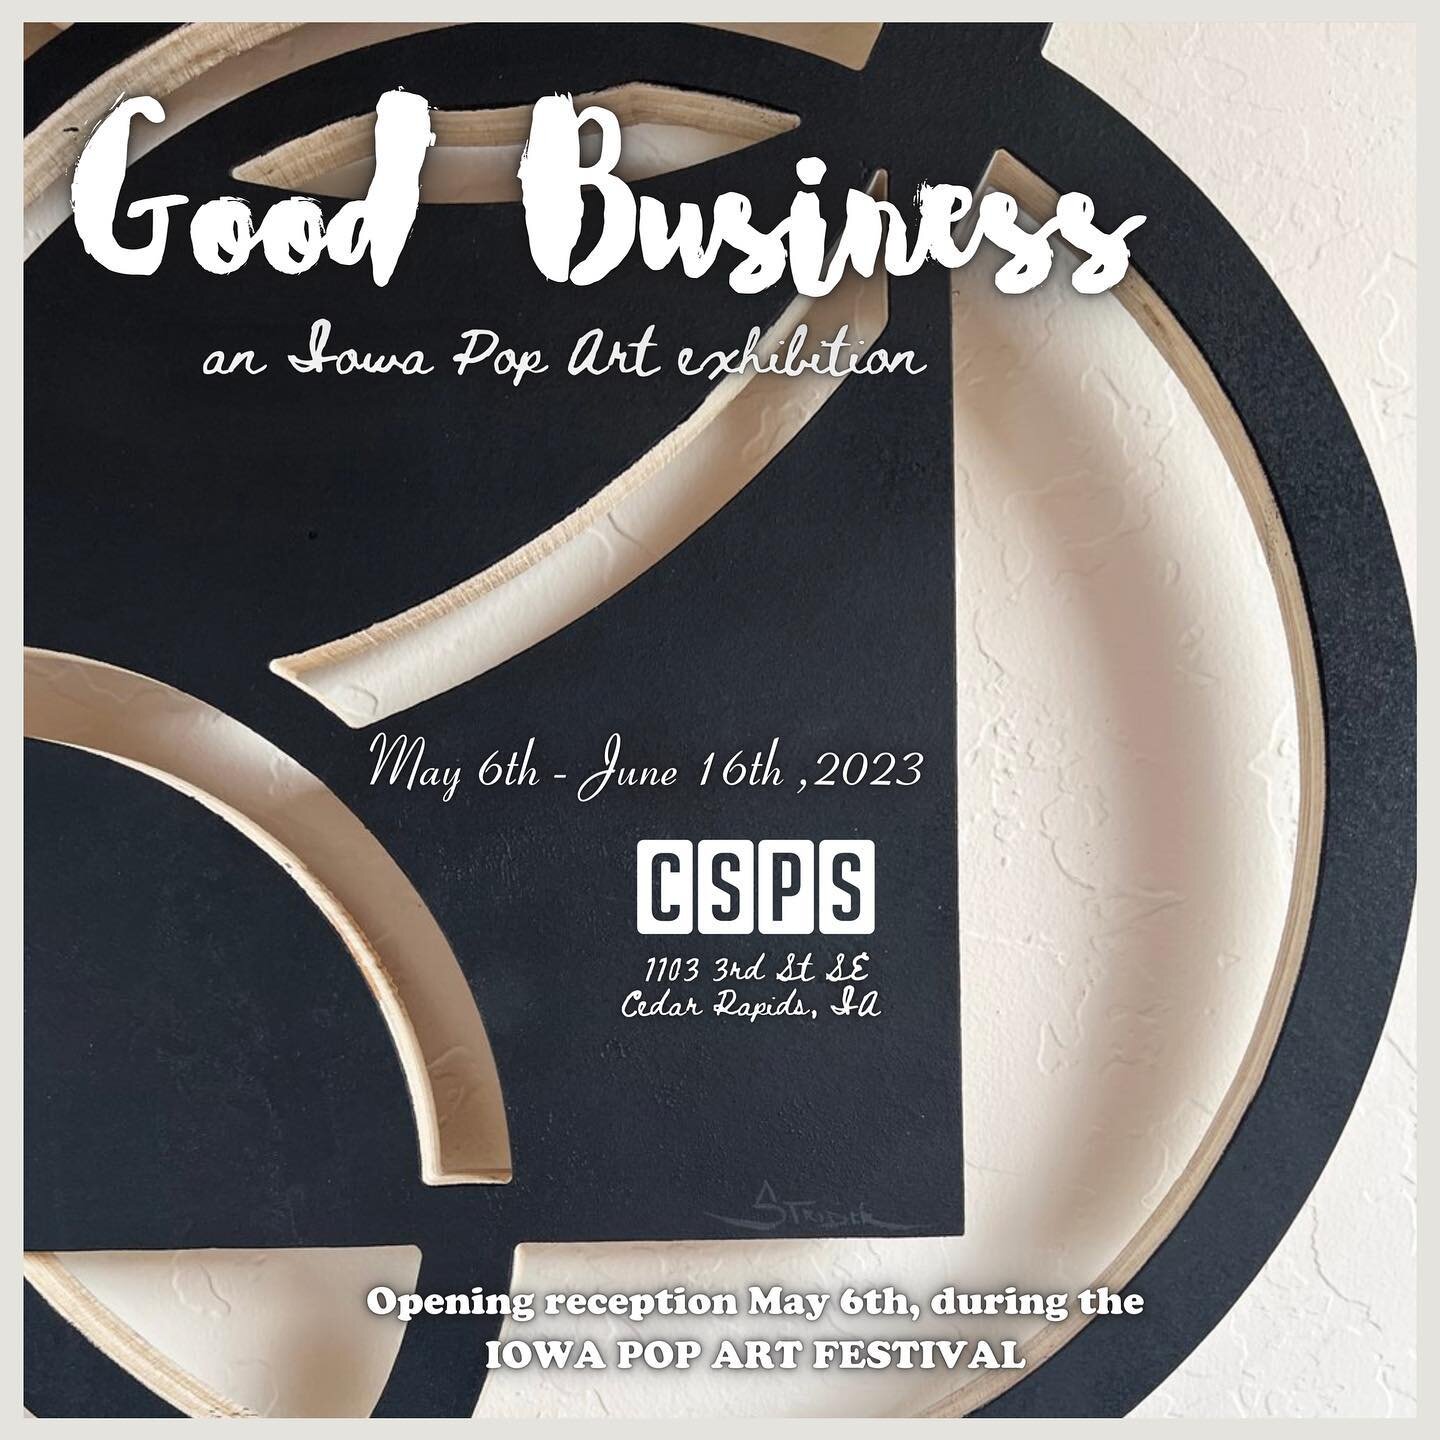 Visit the opening reception of &ldquo;Good Business: an Iowa Pop Art exhibition&rdquo; from 10:00am-6:00pm on May 6th during the Iowa Pop Art Festival at the historic CSPS Hall (@cspshall)

&ldquo;Being good in business is the most fascinating kind o